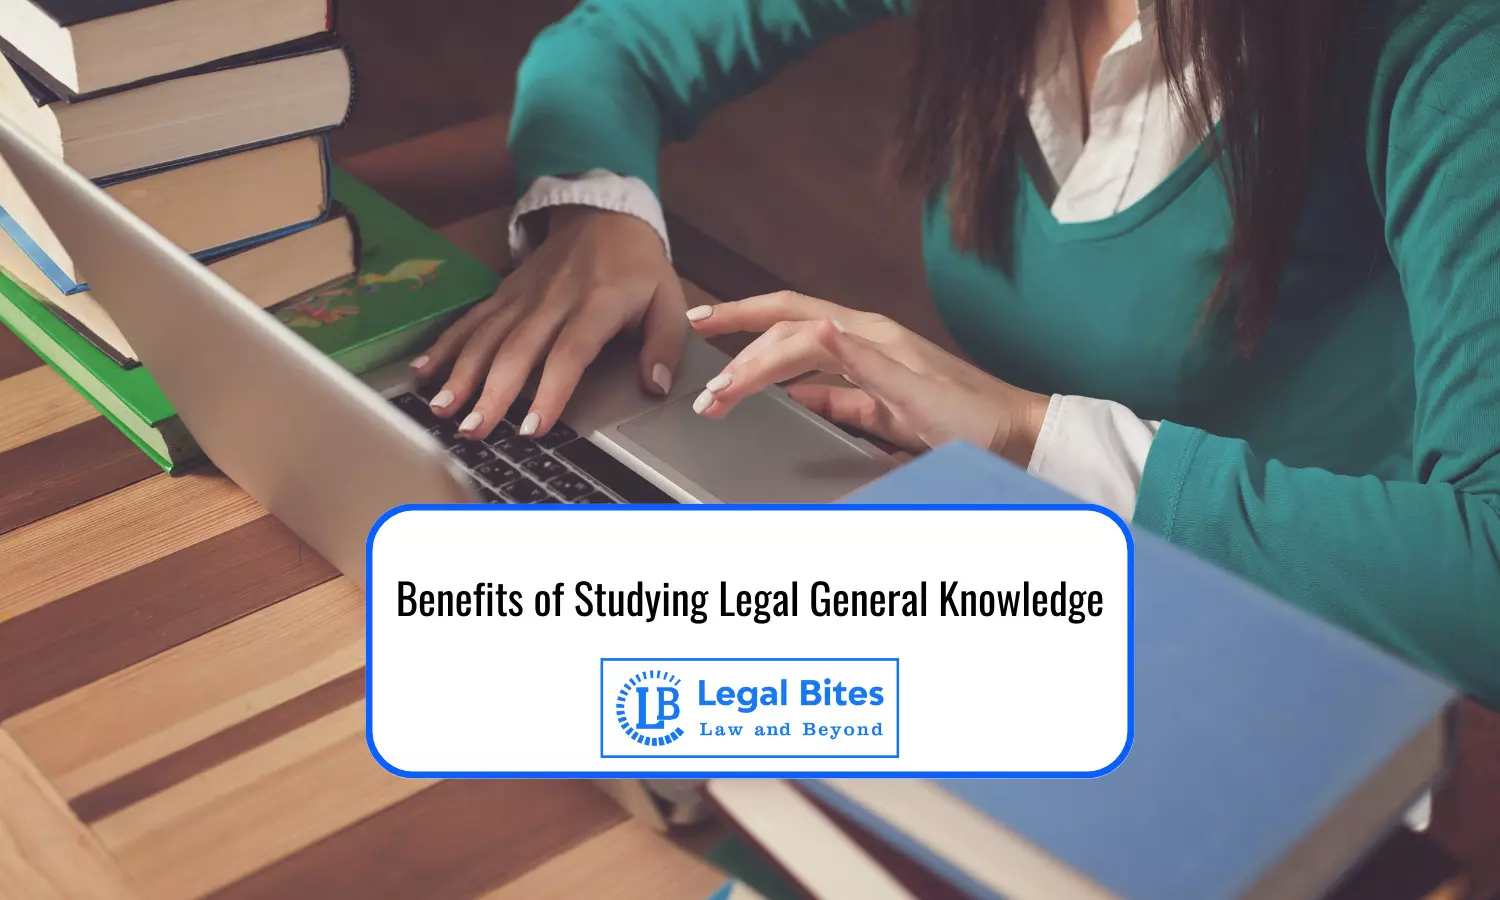 Benefits of Studying Legal General Knowledge